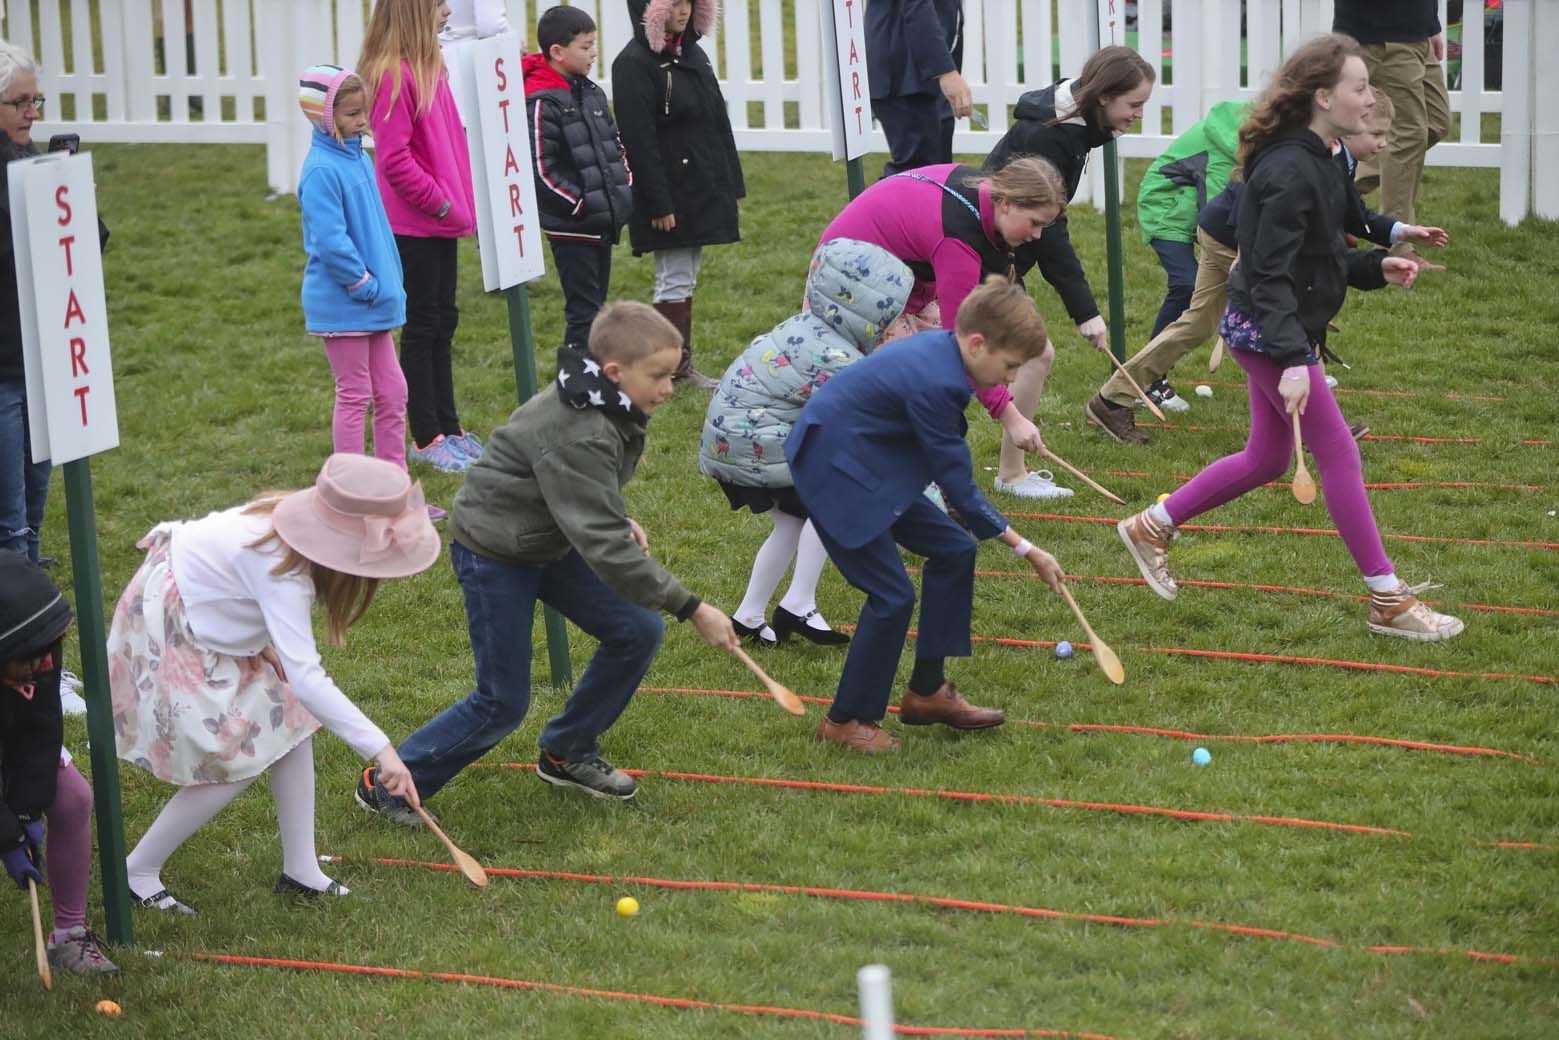 Children participate in the annual White House Easter Egg Roll on the South Lawn of the White House in Washington, Monday, April 2, 2018. (AP Photo/Pablo Martinez Monsivais)